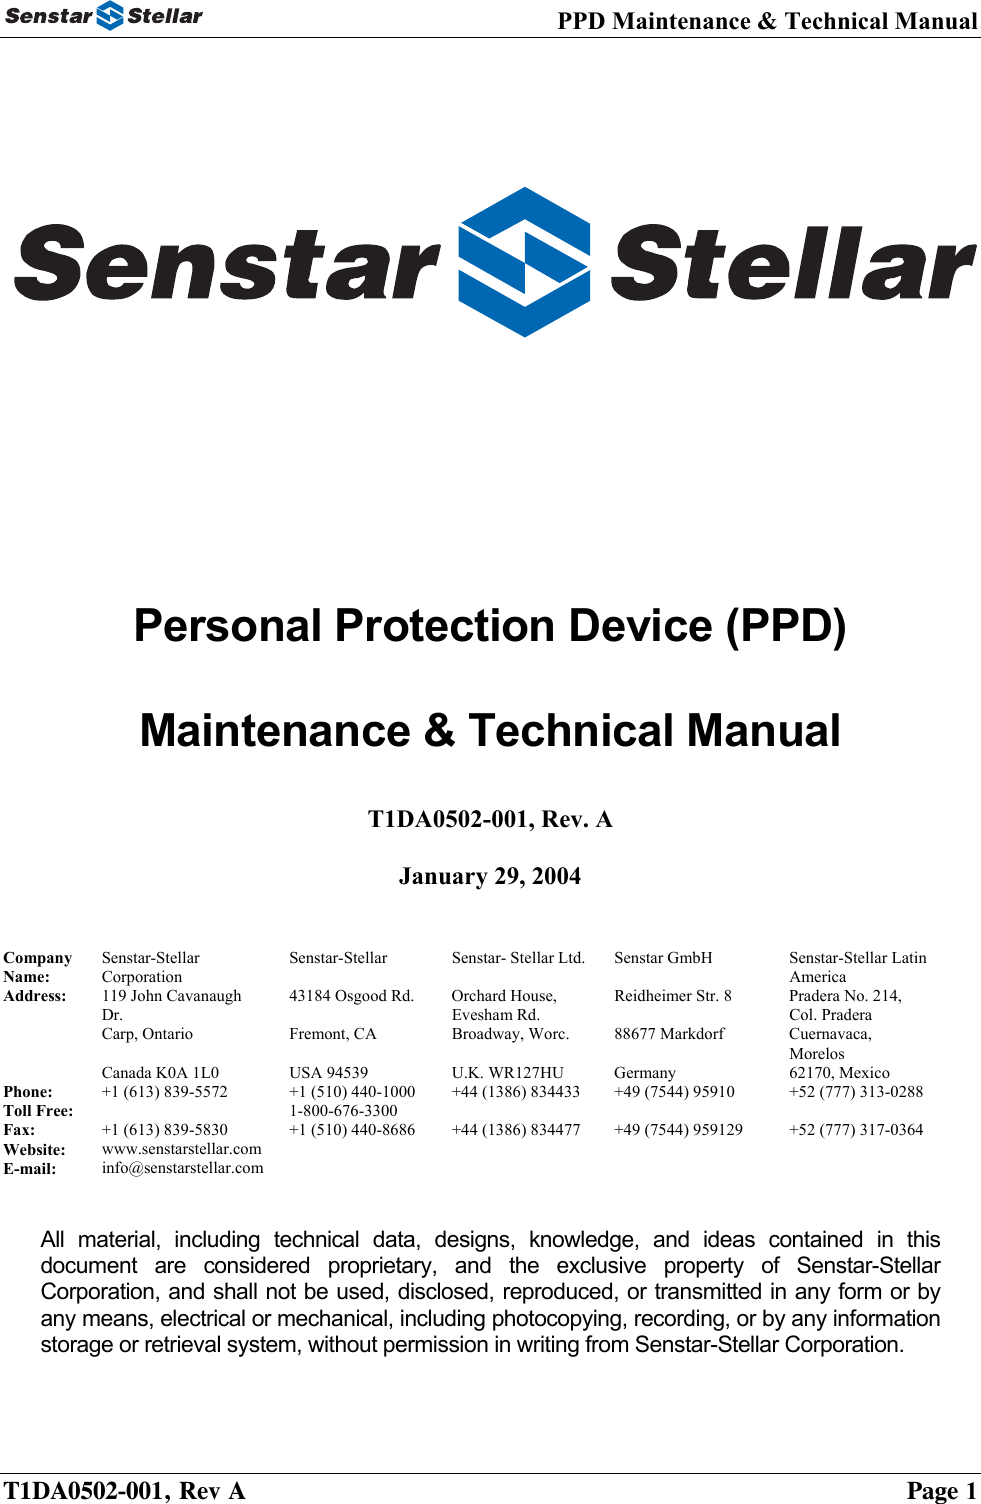 PPD Maintenance &amp; Technical Manual        Personal Protection Device (PPD)  Maintenance &amp; Technical Manual   T1DA0502-001, Rev. A  January 29, 2004   Company Name: Senstar-Stellar Corporation Senstar-Stellar  Senstar- Stellar Ltd.  Senstar GmbH  Senstar-Stellar Latin America Address:  119 John Cavanaugh Dr. 43184 Osgood Rd.  Orchard House, Evesham Rd. Reidheimer Str. 8  Pradera No. 214, Col. Pradera  Carp, Ontario  Fremont, CA  Broadway, Worc.  88677 Markdorf Cuernavaca, Morelos  Canada K0A 1L0  USA 94539  U.K. WR127HU  Germany  62170, Mexico Phone:   +1 (613) 839-5572  +1 (510) 440-1000  +44 (1386) 834433  +49 (7544) 95910  +52 (777) 313-0288 Toll Free:   1-800-676-3300    Fax:   +1 (613) 839-5830  +1 (510) 440-8686  +44 (1386) 834477  +49 (7544) 959129  +52 (777) 317-0364 Website:  www.senstarstellar.com      E-mail:  info@senstarstellar.com        All material, including technical data, designs, knowledge, and ideas contained in this document are considered proprietary, and the exclusive property of Senstar-Stellar Corporation, and shall not be used, disclosed, reproduced, or transmitted in any form or by any means, electrical or mechanical, including photocopying, recording, or by any information storage or retrieval system, without permission in writing from Senstar-Stellar Corporation.   T1DA0502-001, Rev A    Page 1 